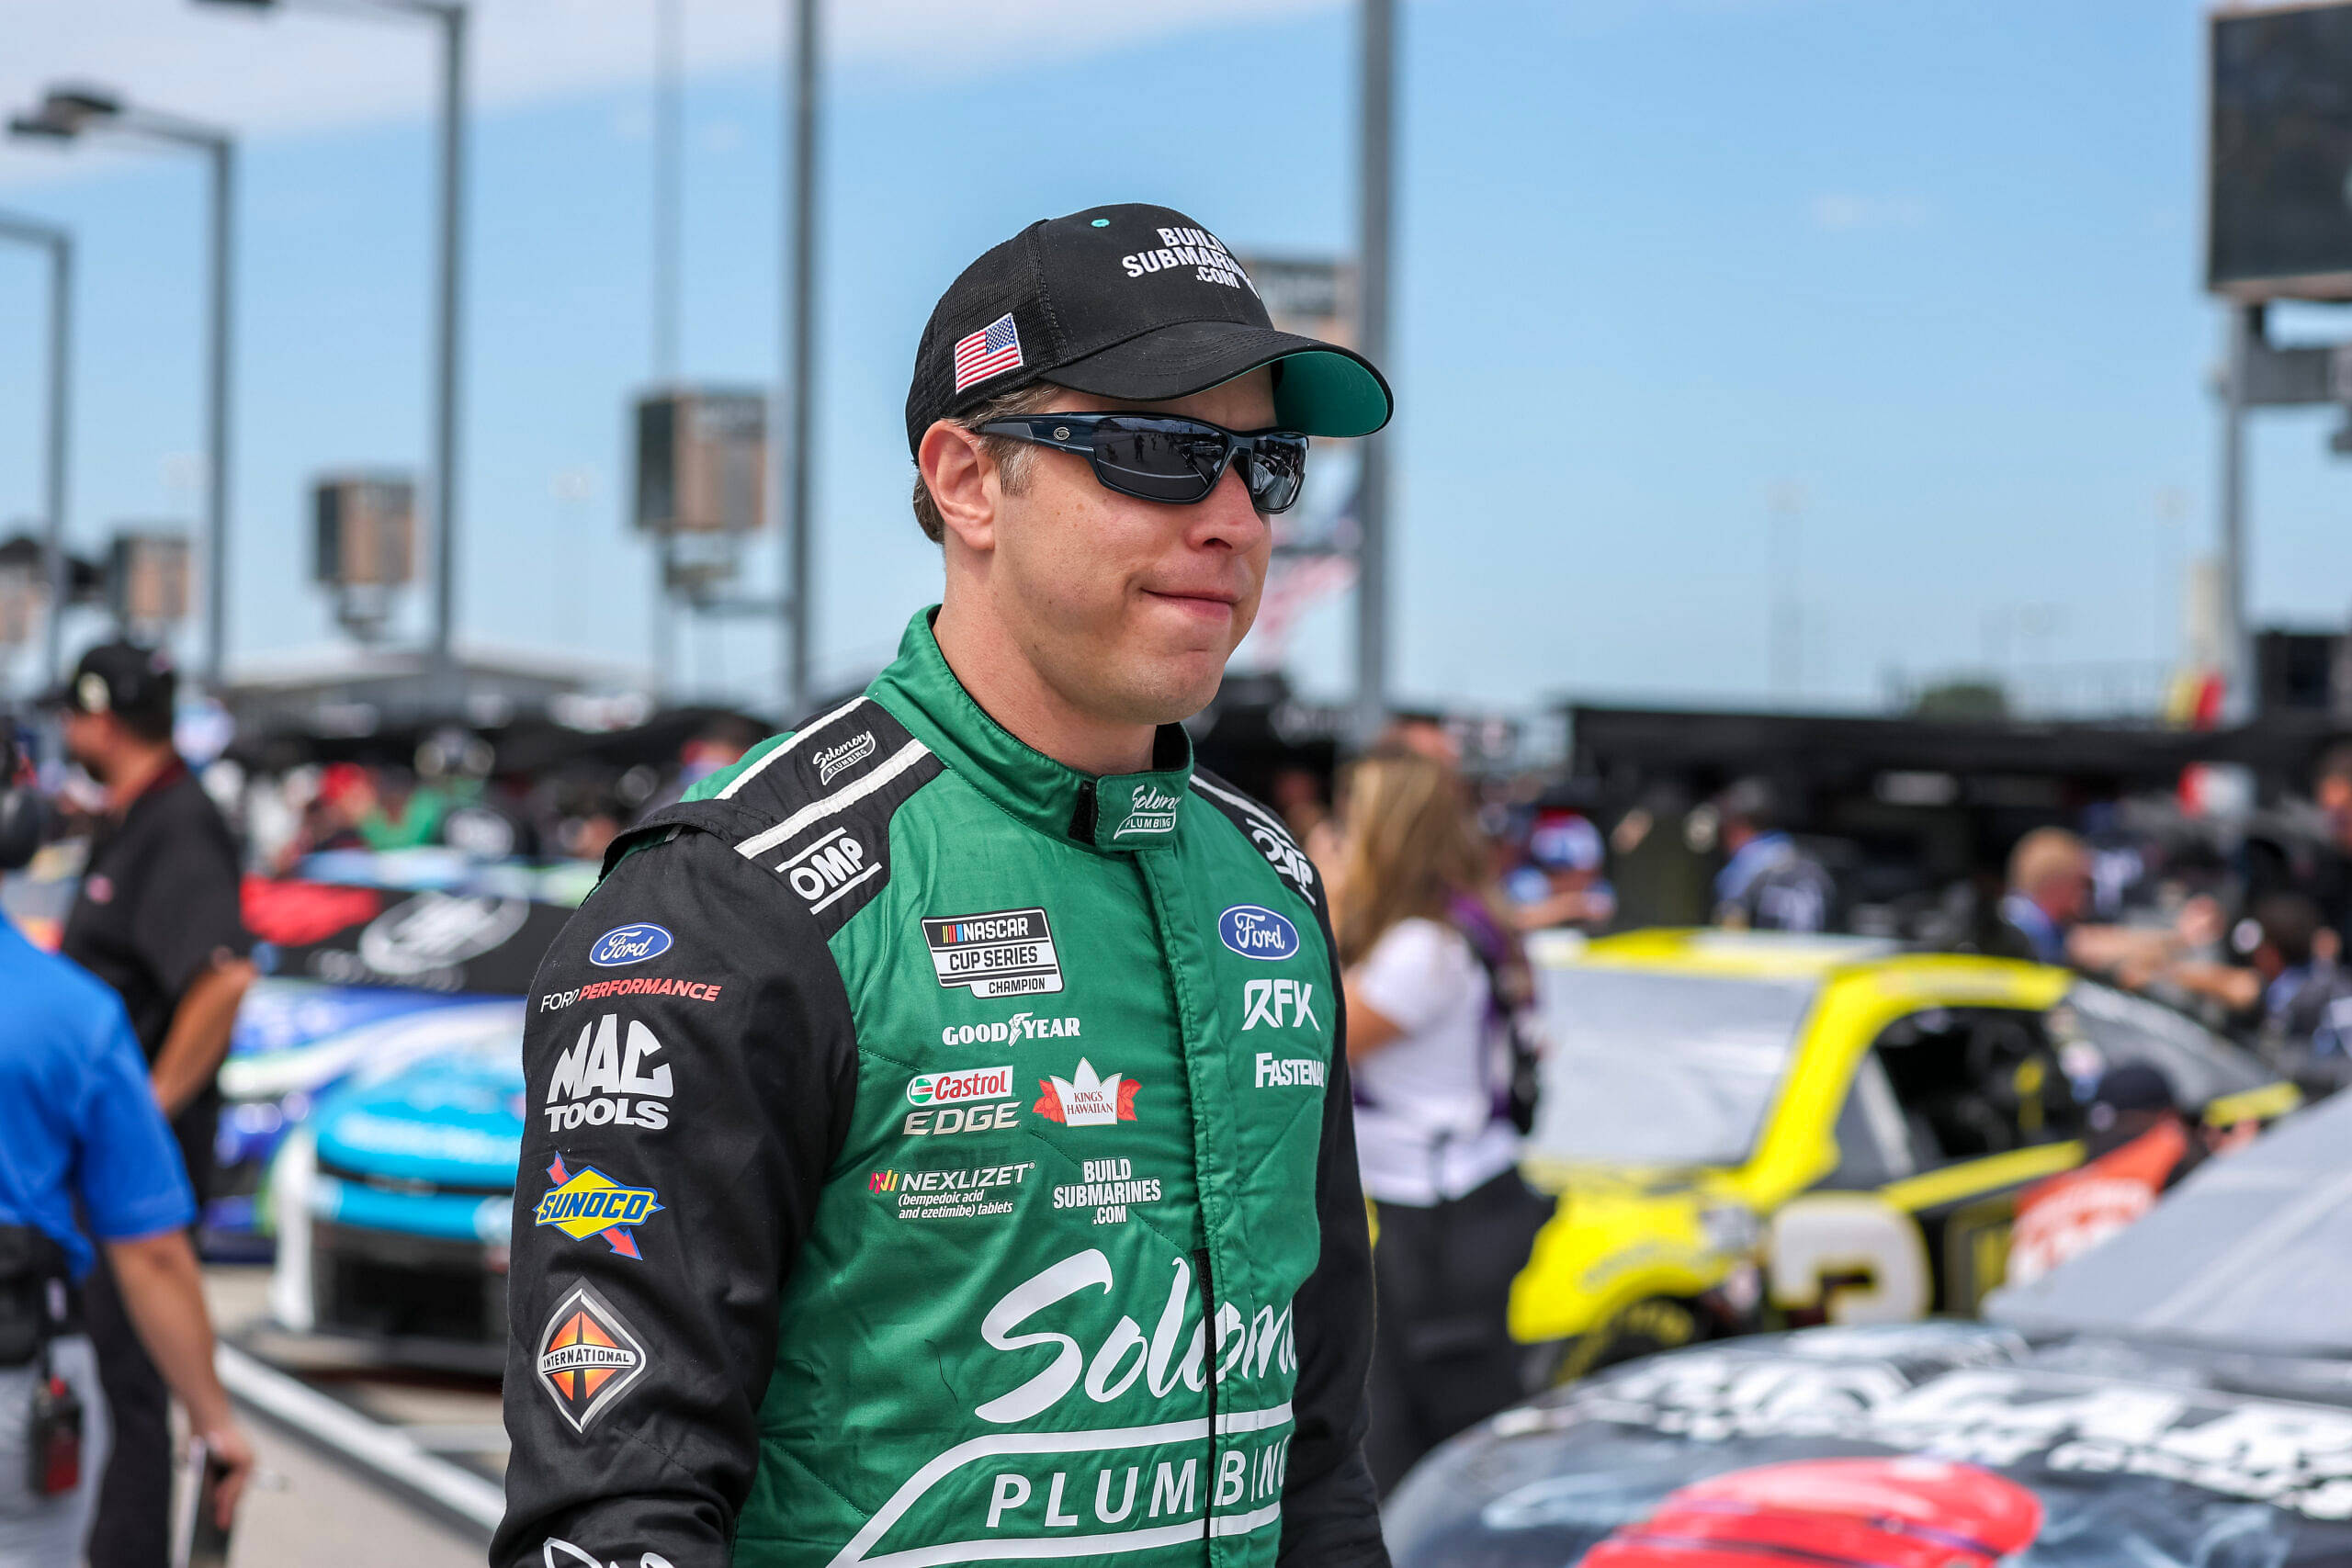 Worst Racing to Watch” Brad Keselowski Registers Strong Plea With NASCAR After Kansas Race